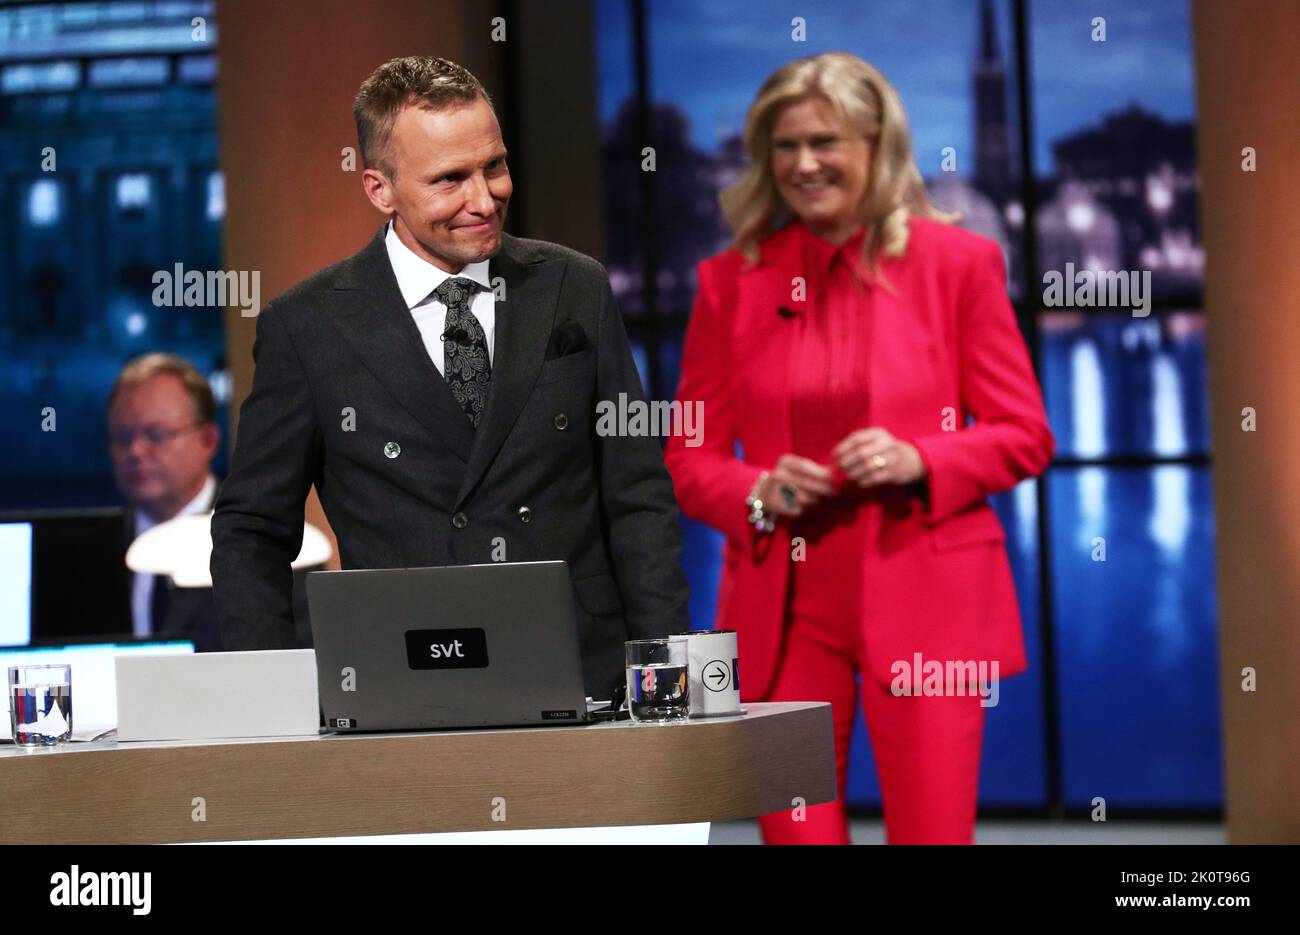 The Swedish parliamentary elections, election day, during Sunday in Stockholm, Sweden. In the picture: Sveriges Television's broadcast during election evening. In the picture: Anders Holmberg and Camilla Kvartoft. Stock Photo